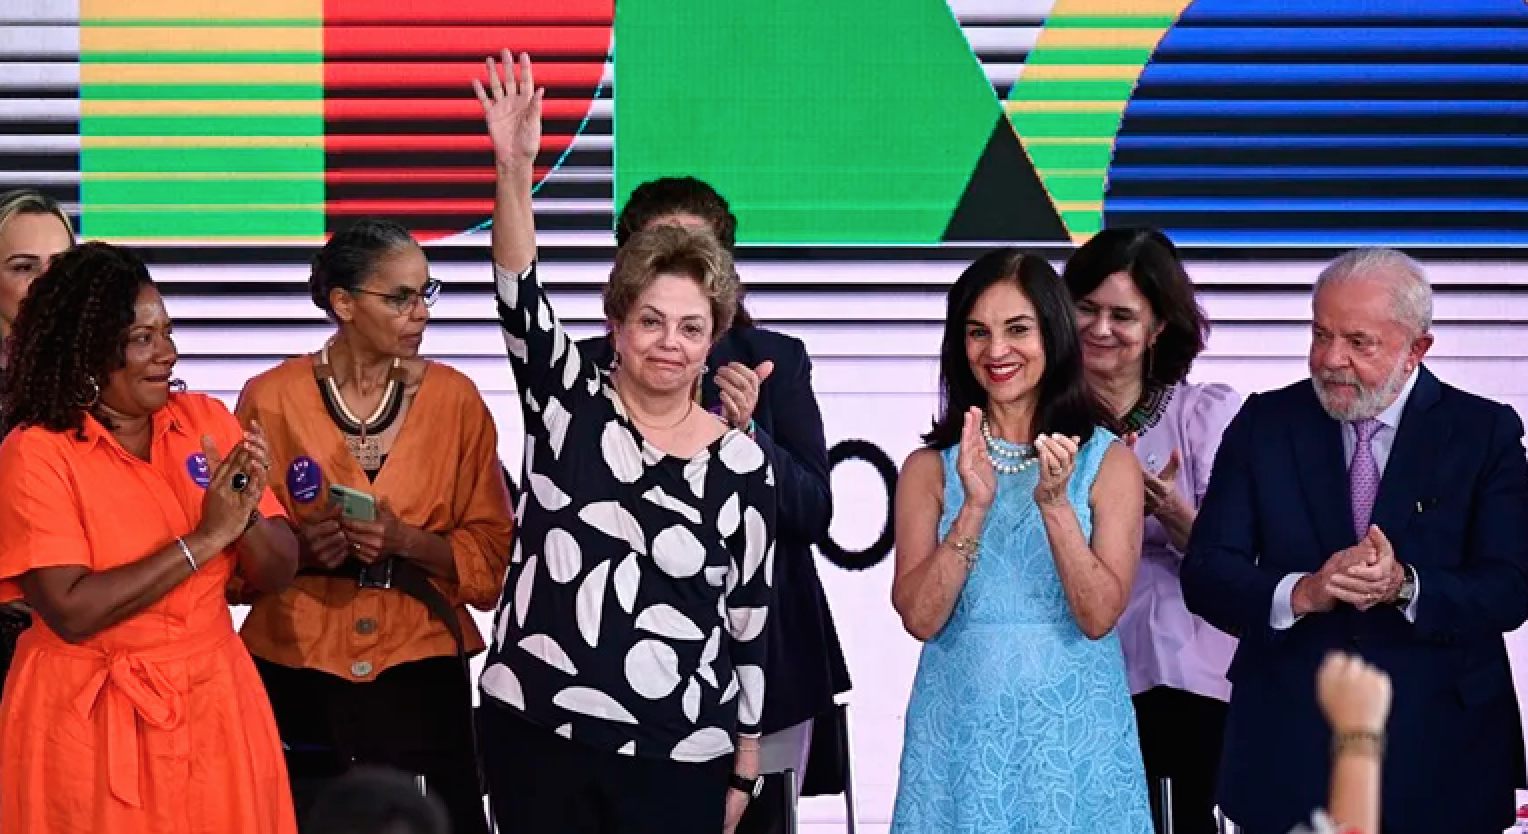 President Lula presented a group of actions to ensure the rights of Brazilian women